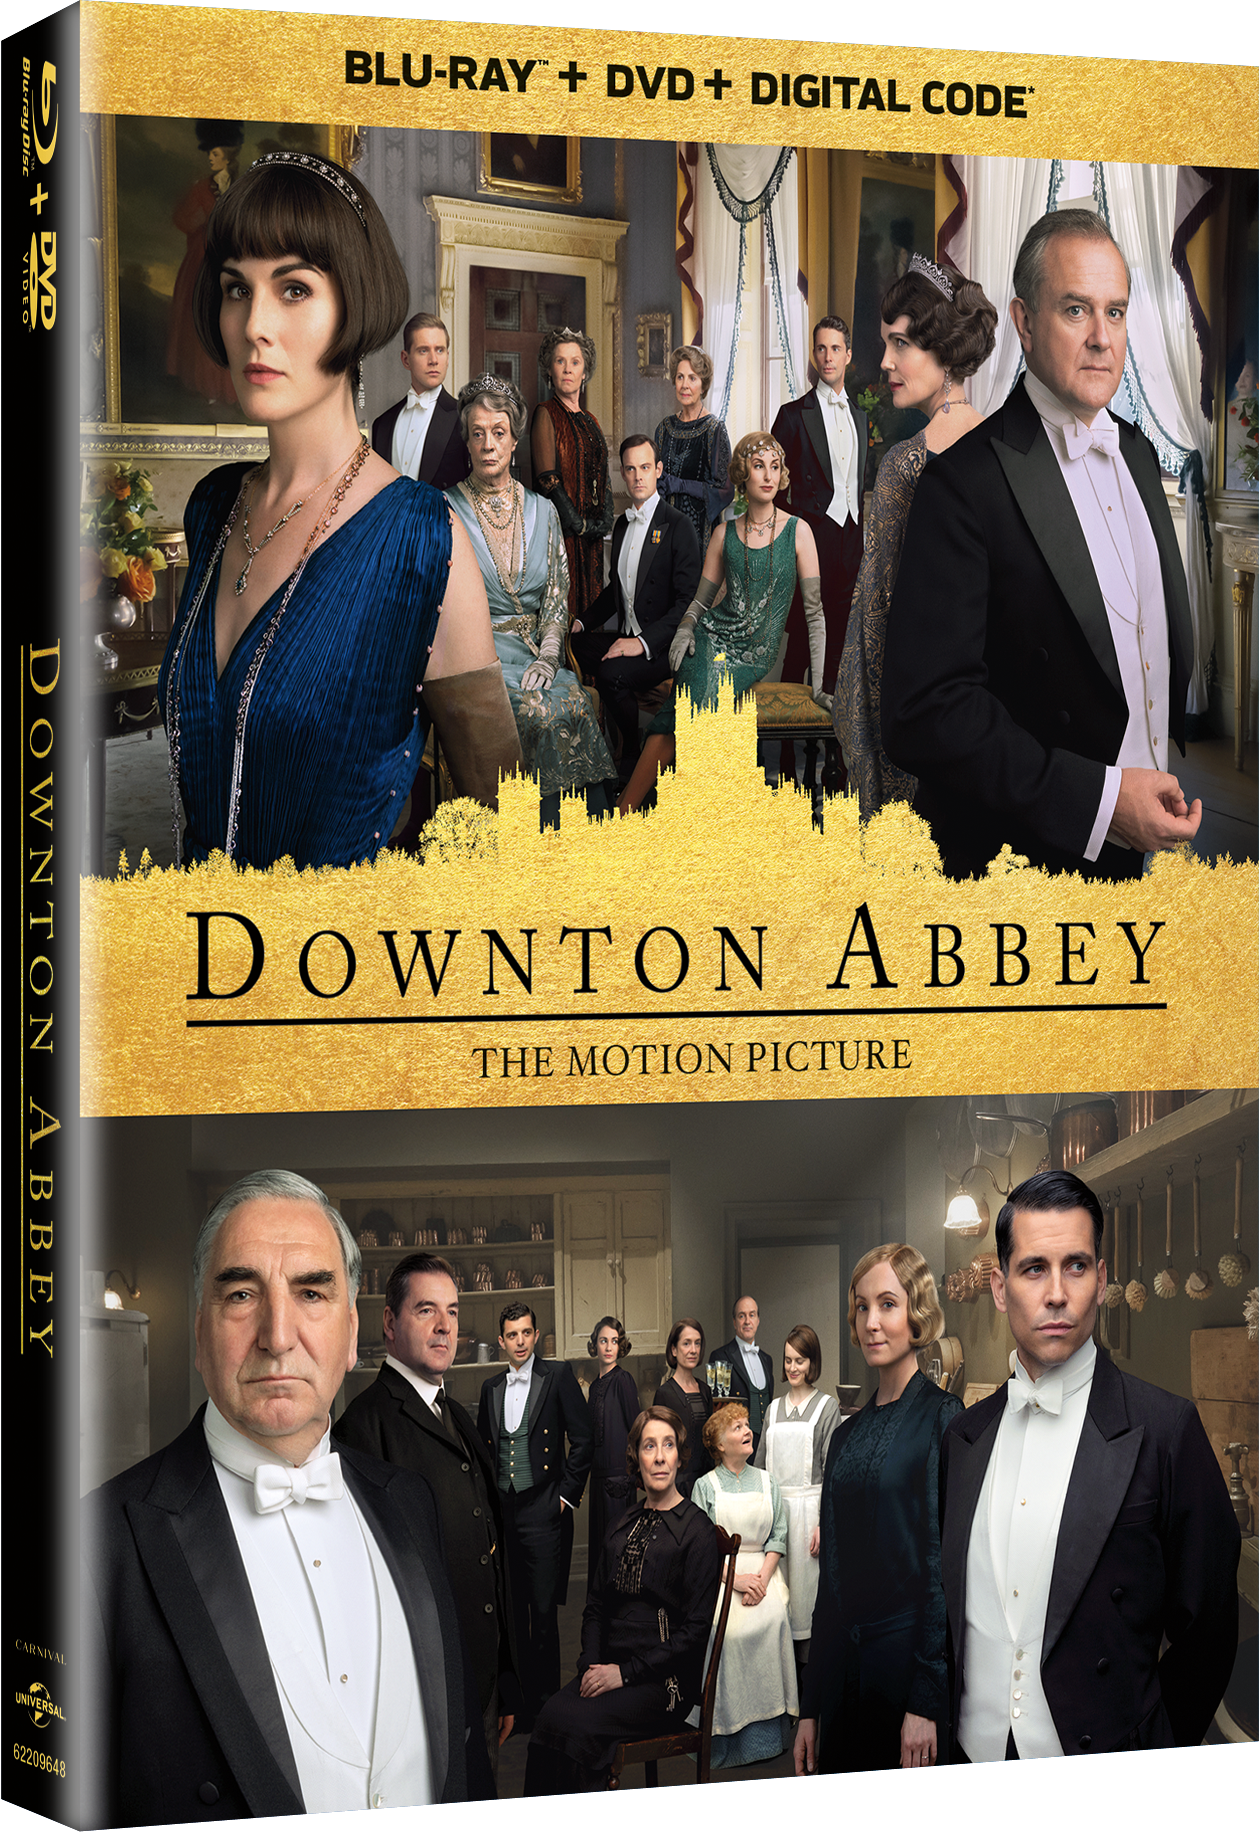 DOWNTON ABBEY - NOW on Blu-ray & DVD